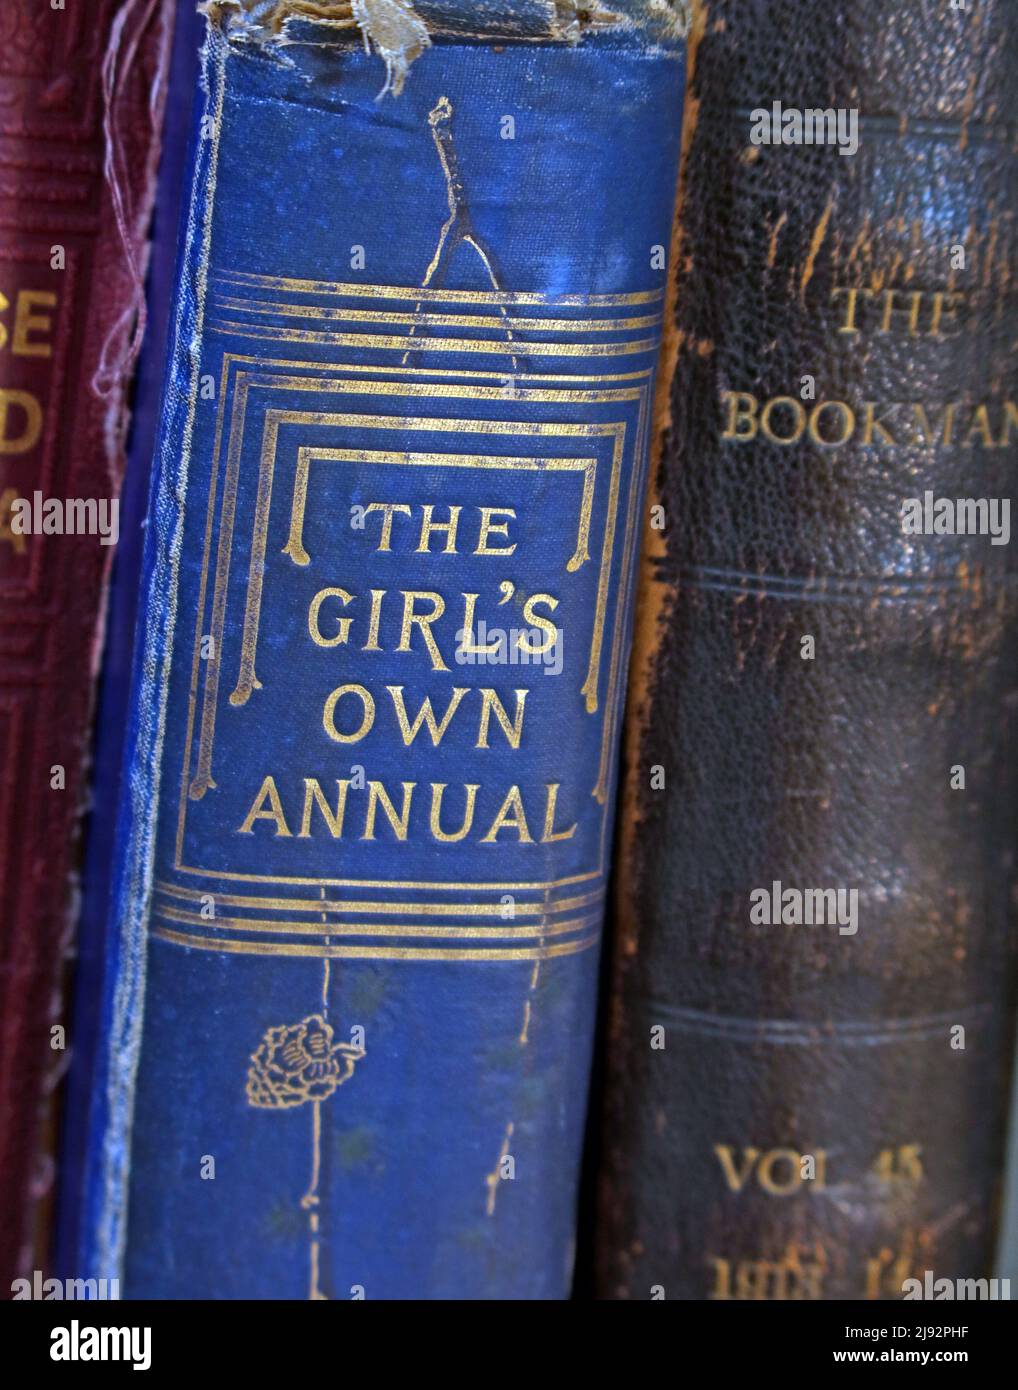 The Girls Own Annual, historic copy, classic book in blue Stock Photo